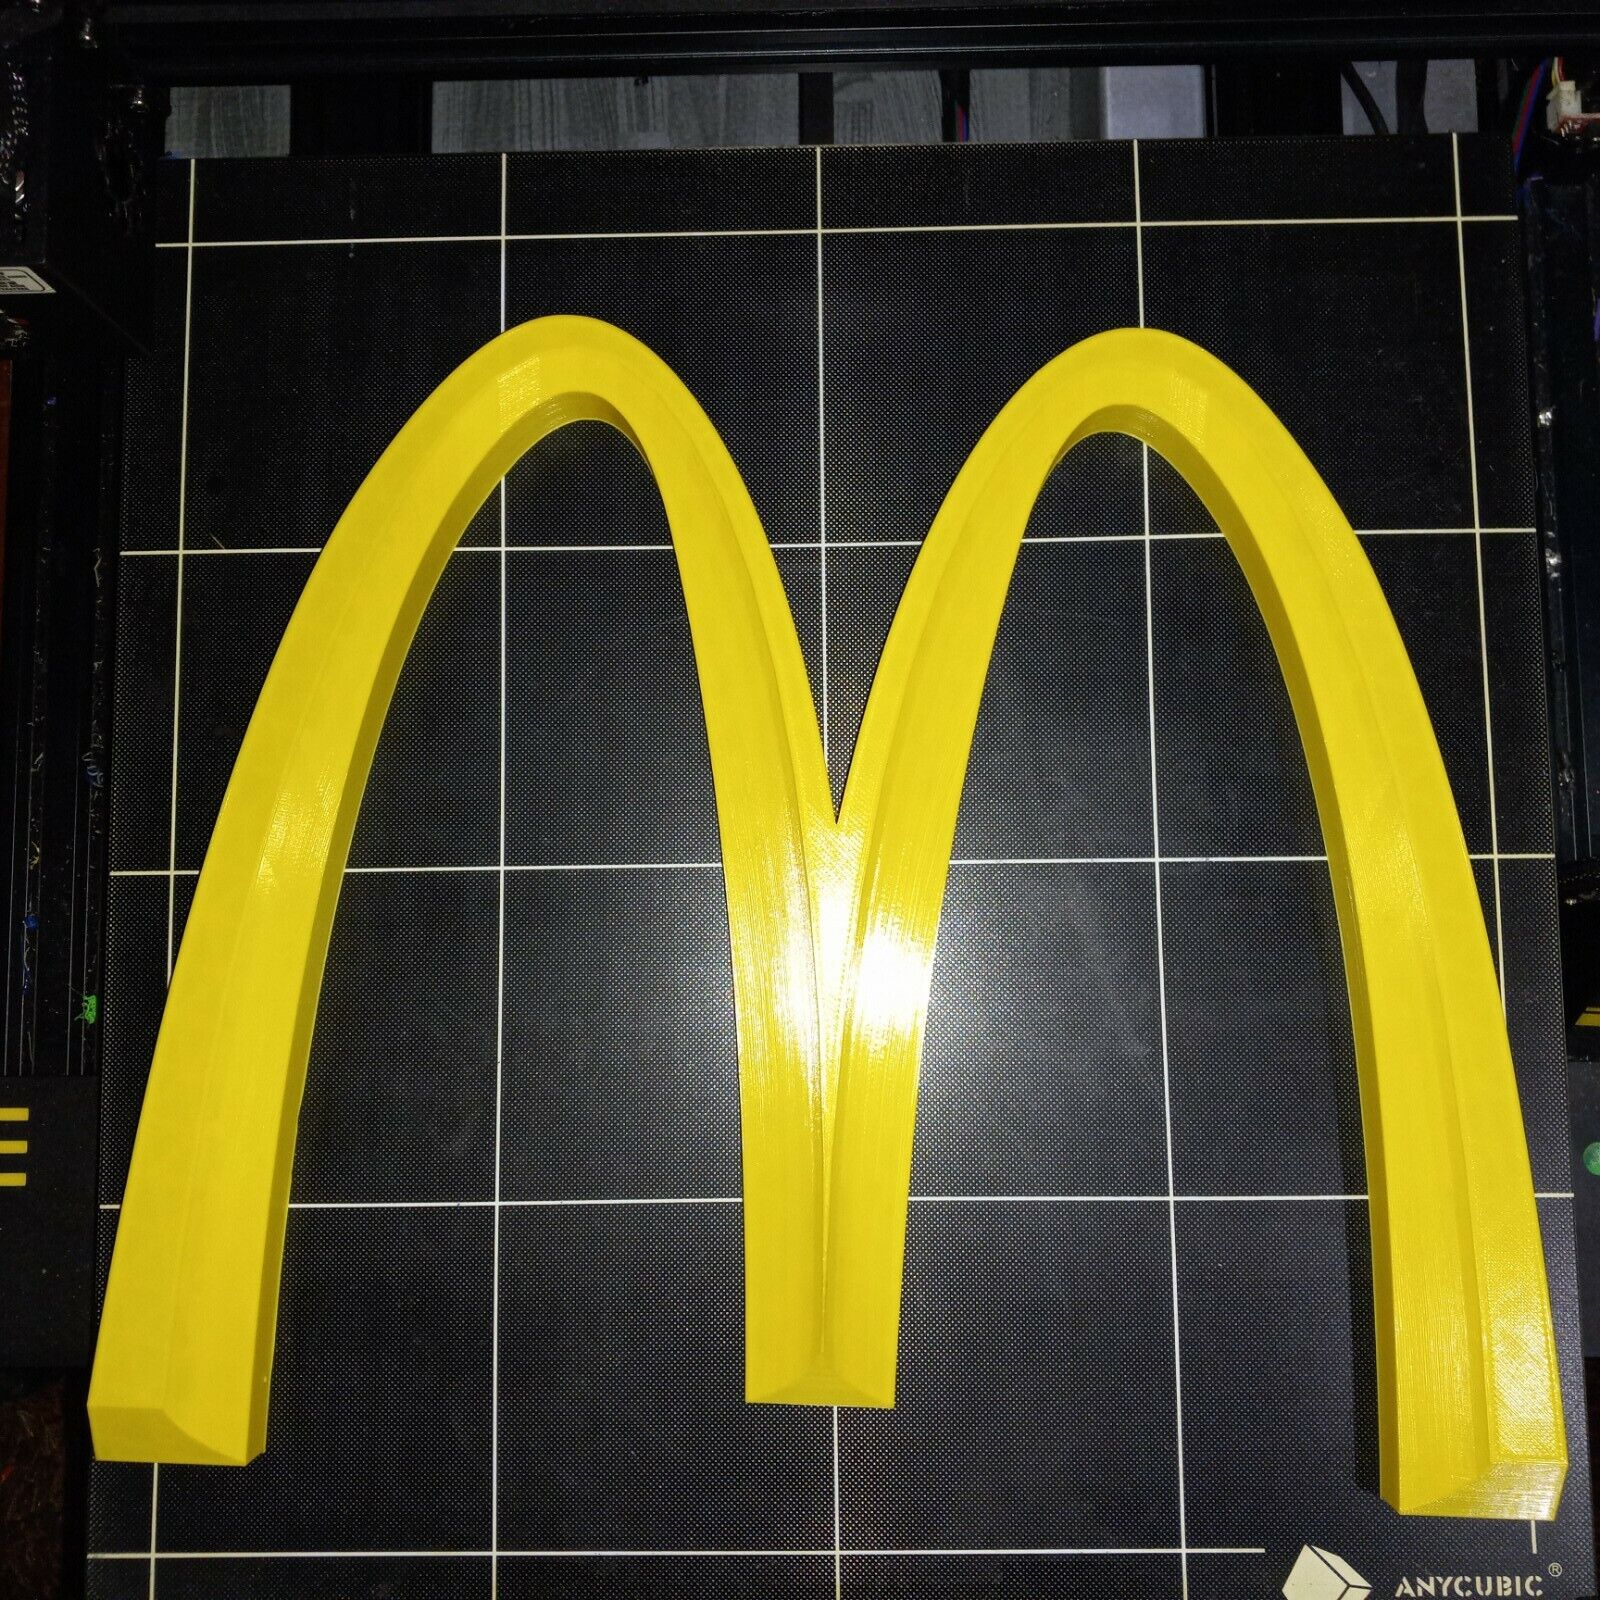 McDonald’s Big “M” 3D Advertising Sign Golden Arches 25 Inch 3D Printed